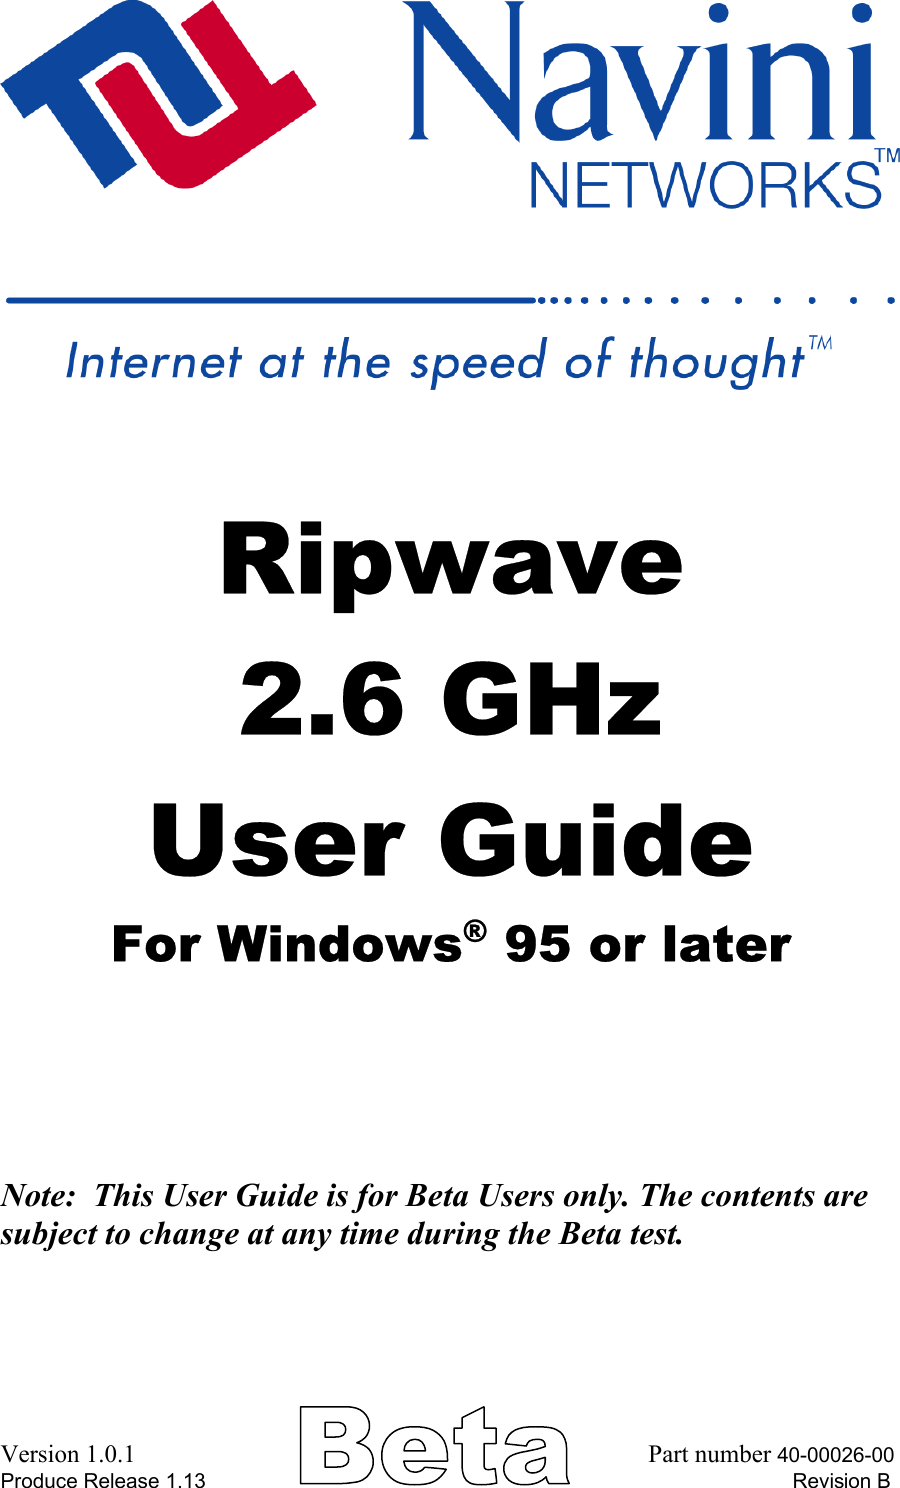      Ripwave  2.6 GHz User Guide For Windows® 95 or later     Note:  This User Guide is for Beta Users only. The contents are subject to change at any time during the Beta test.  Version 1.0.1                                                                                  Part number 40-00026-00 Produce Release 1.13                                                                                                      Revision B 